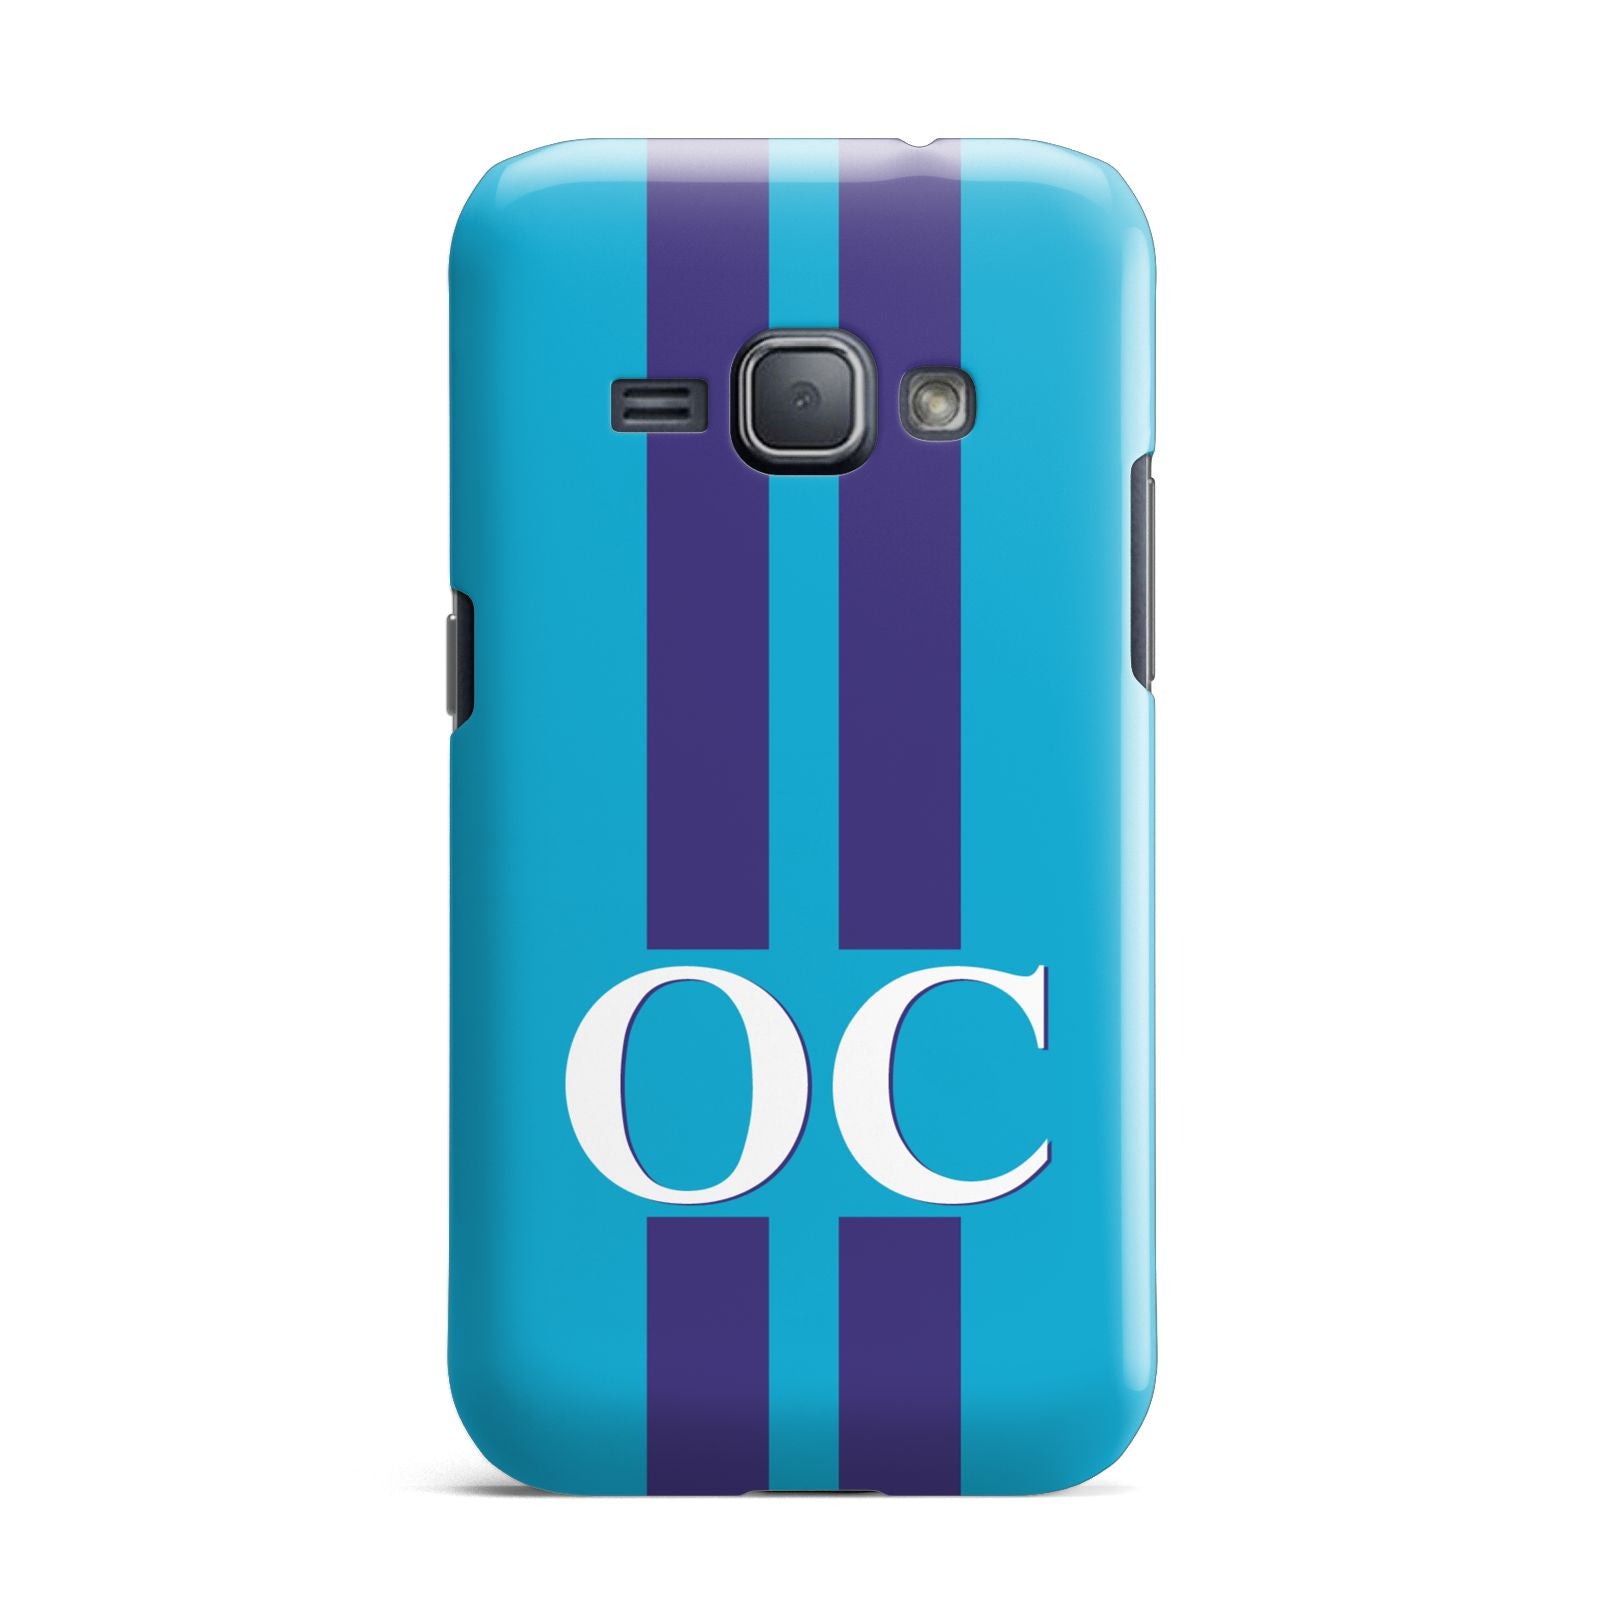 Turquoise Personalised Samsung Galaxy J1 2016 Case